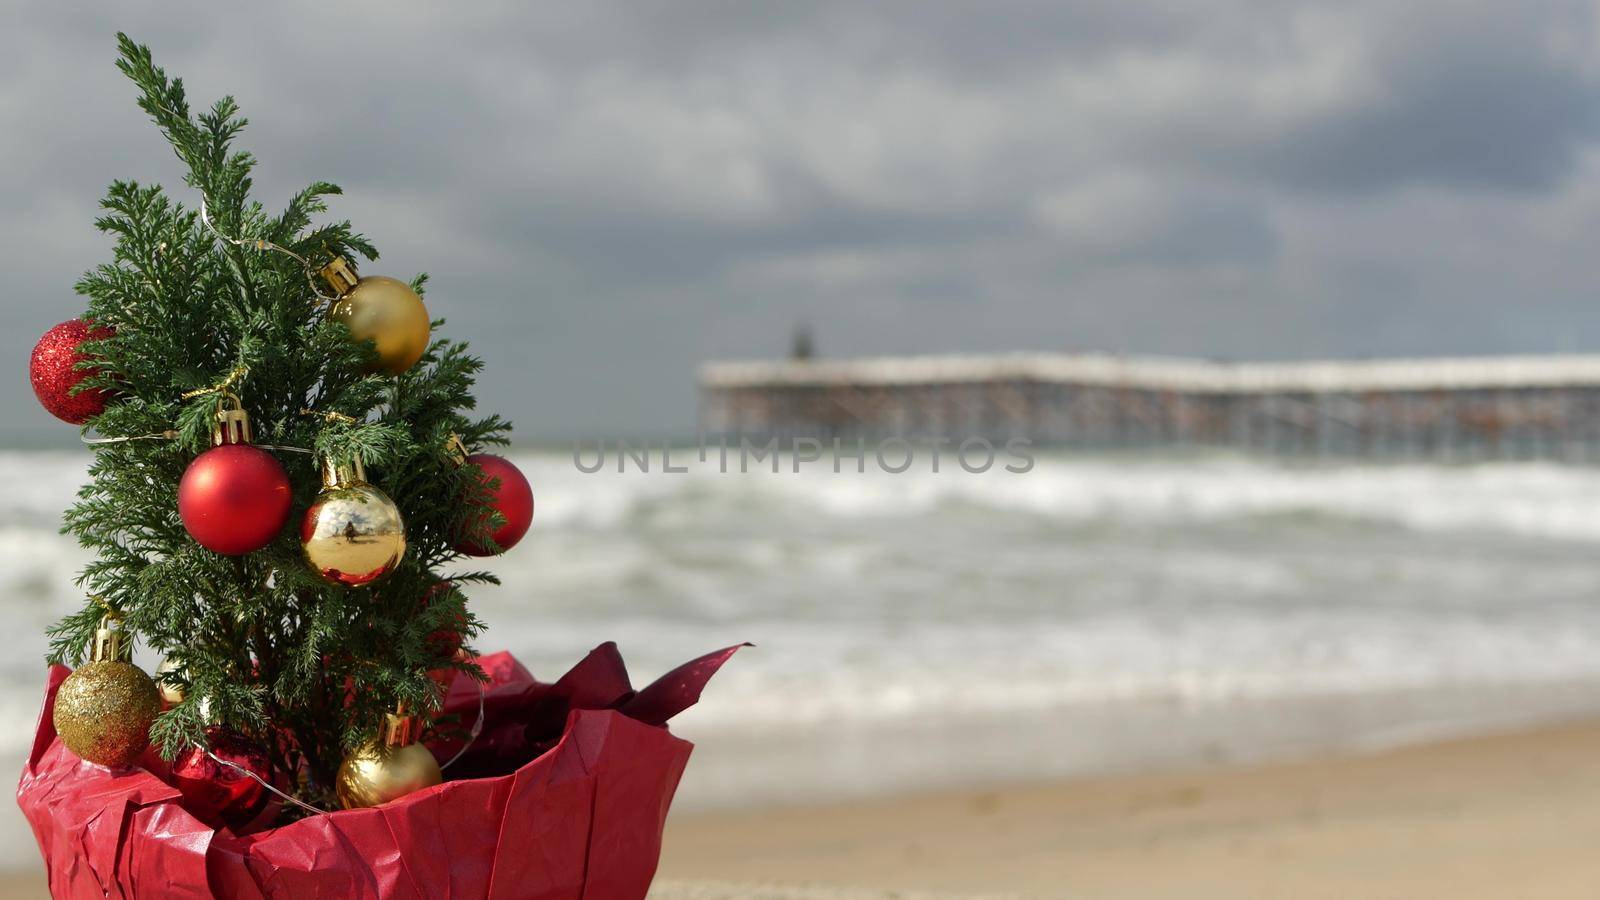 Christmas tree on sandy sea beach, New Year on ocean coast, Xmas in California. Decor from pine or fir tree, winter holidays in USA. Festive decoration, waves and seascape. Seamless looped cinemagraph